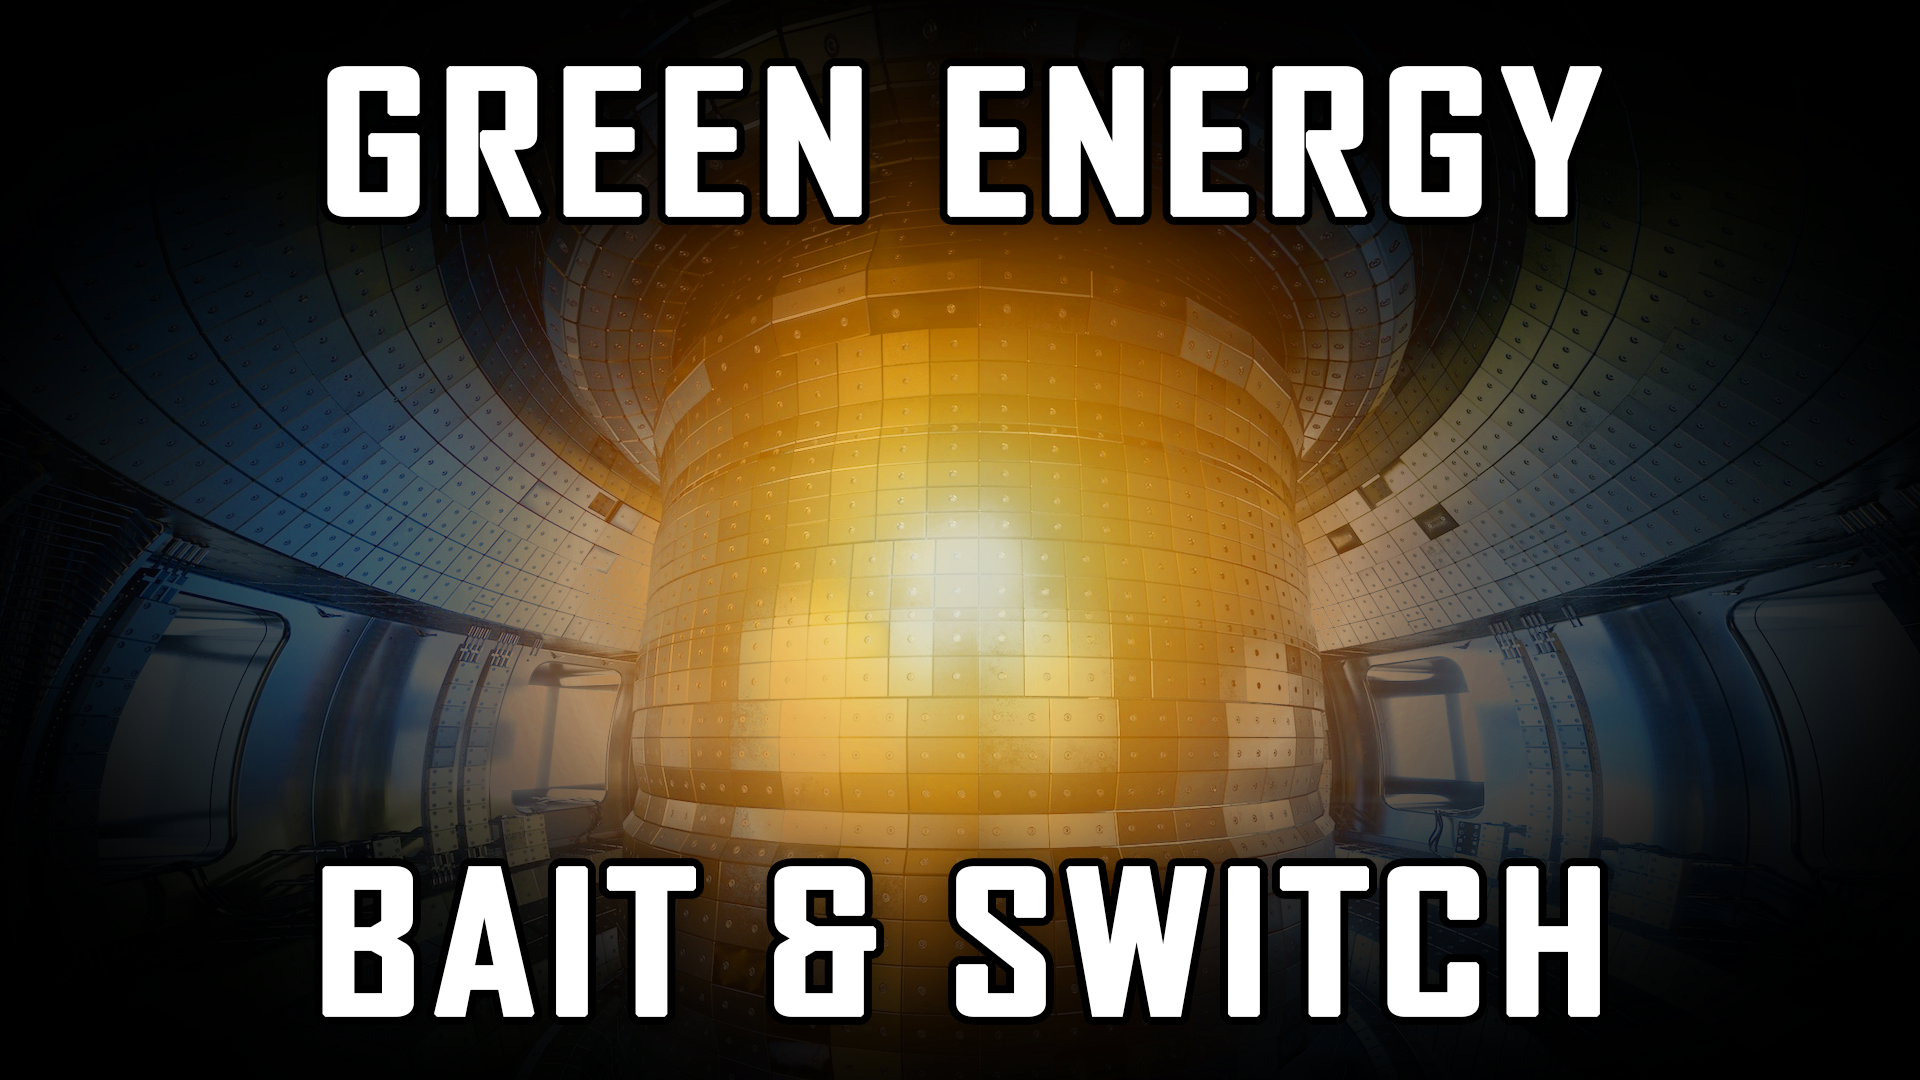 NUCLEAR FUSION - The Next Stage of the Green Energy/Climate Change Agenda